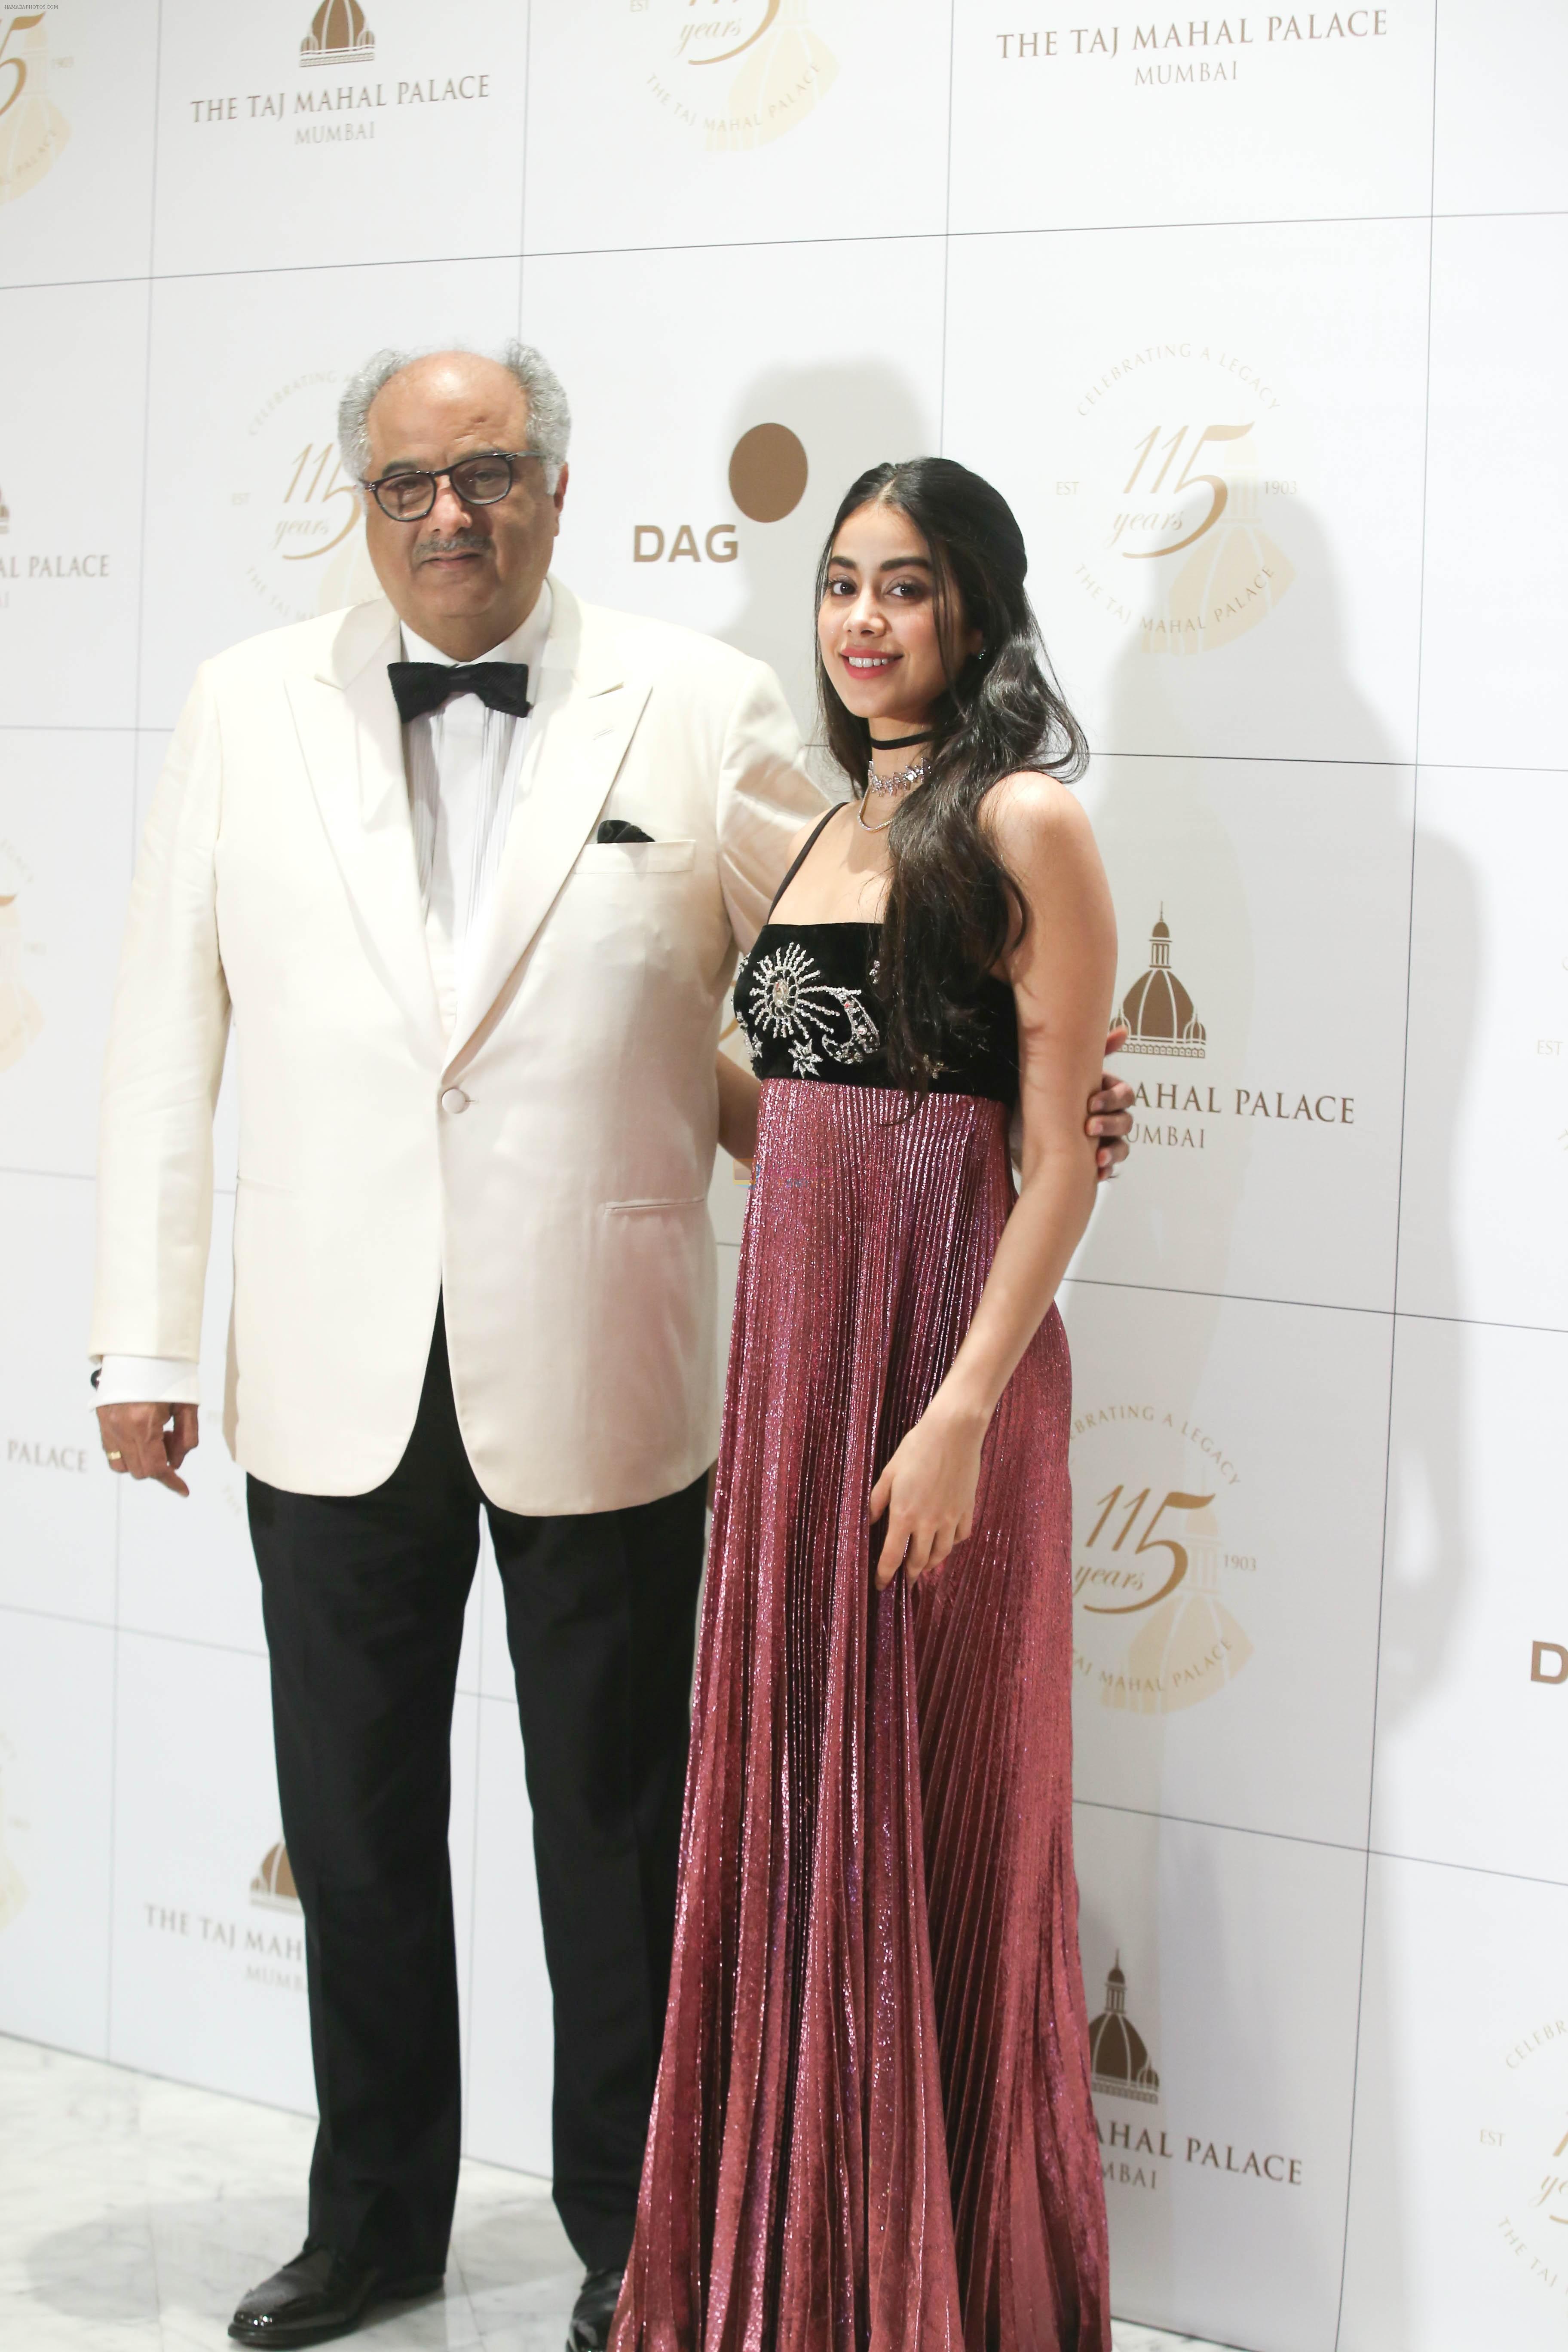 Janhvi Kapoor, Boney Kapoor attends the 115th anniversary celebration of Taj Mahal Palace which was celebrated with A Black Tie Charity Ball in mumbai on 15th Dec 2018